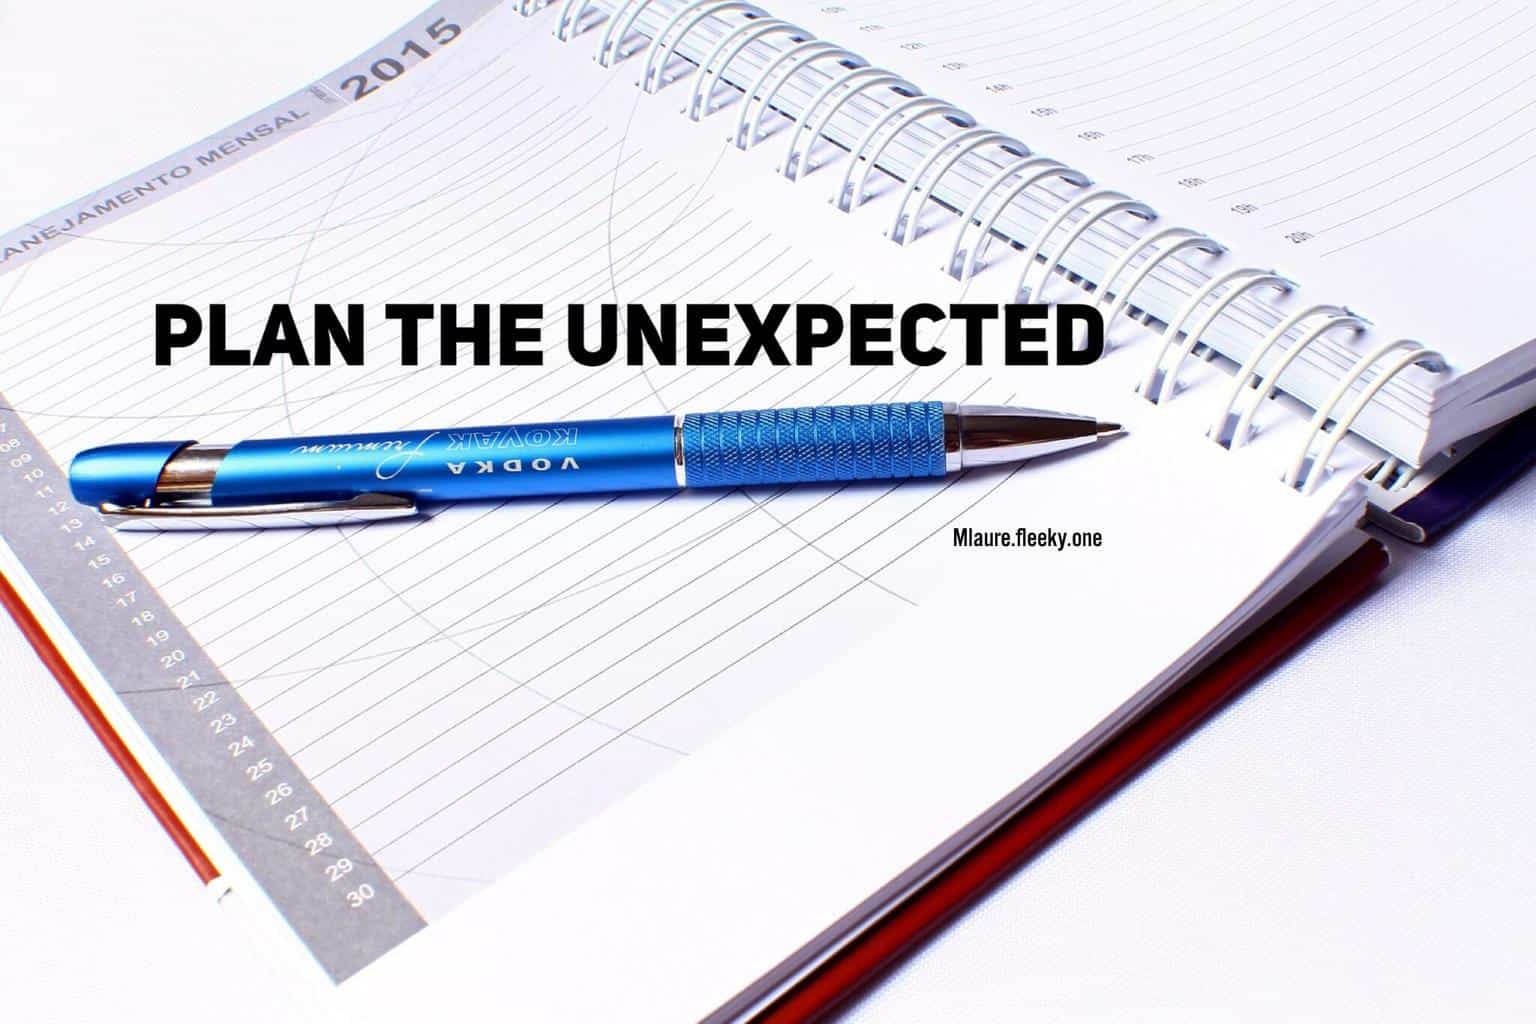 Plan the unexpected